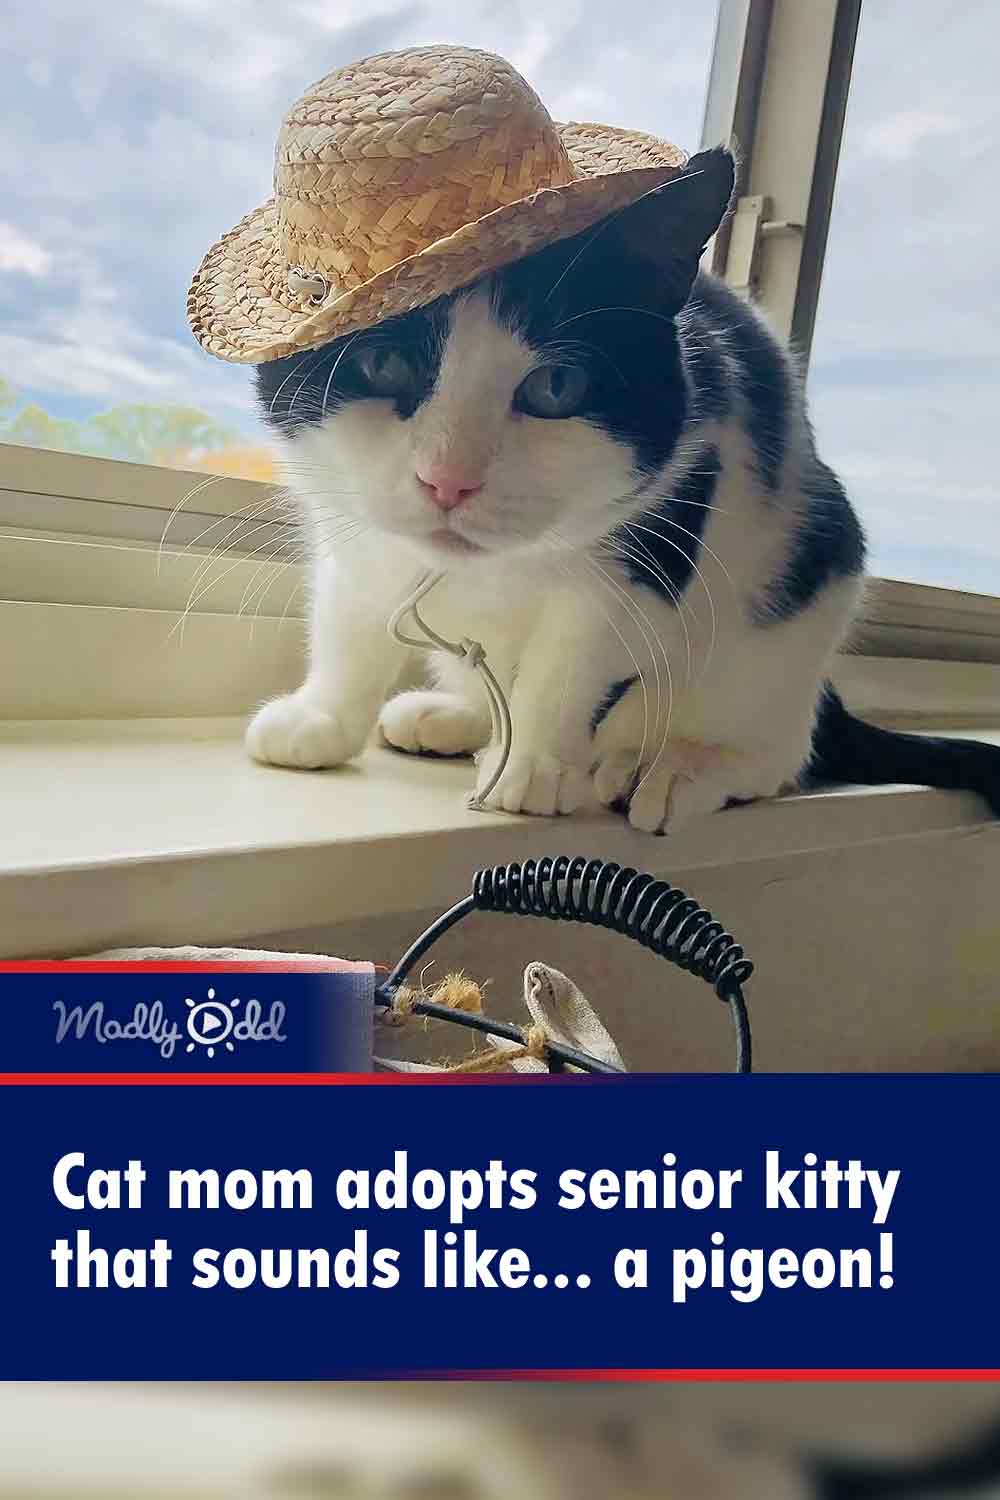 Cat mom adopts senior kitty that sounds like... a pigeon!